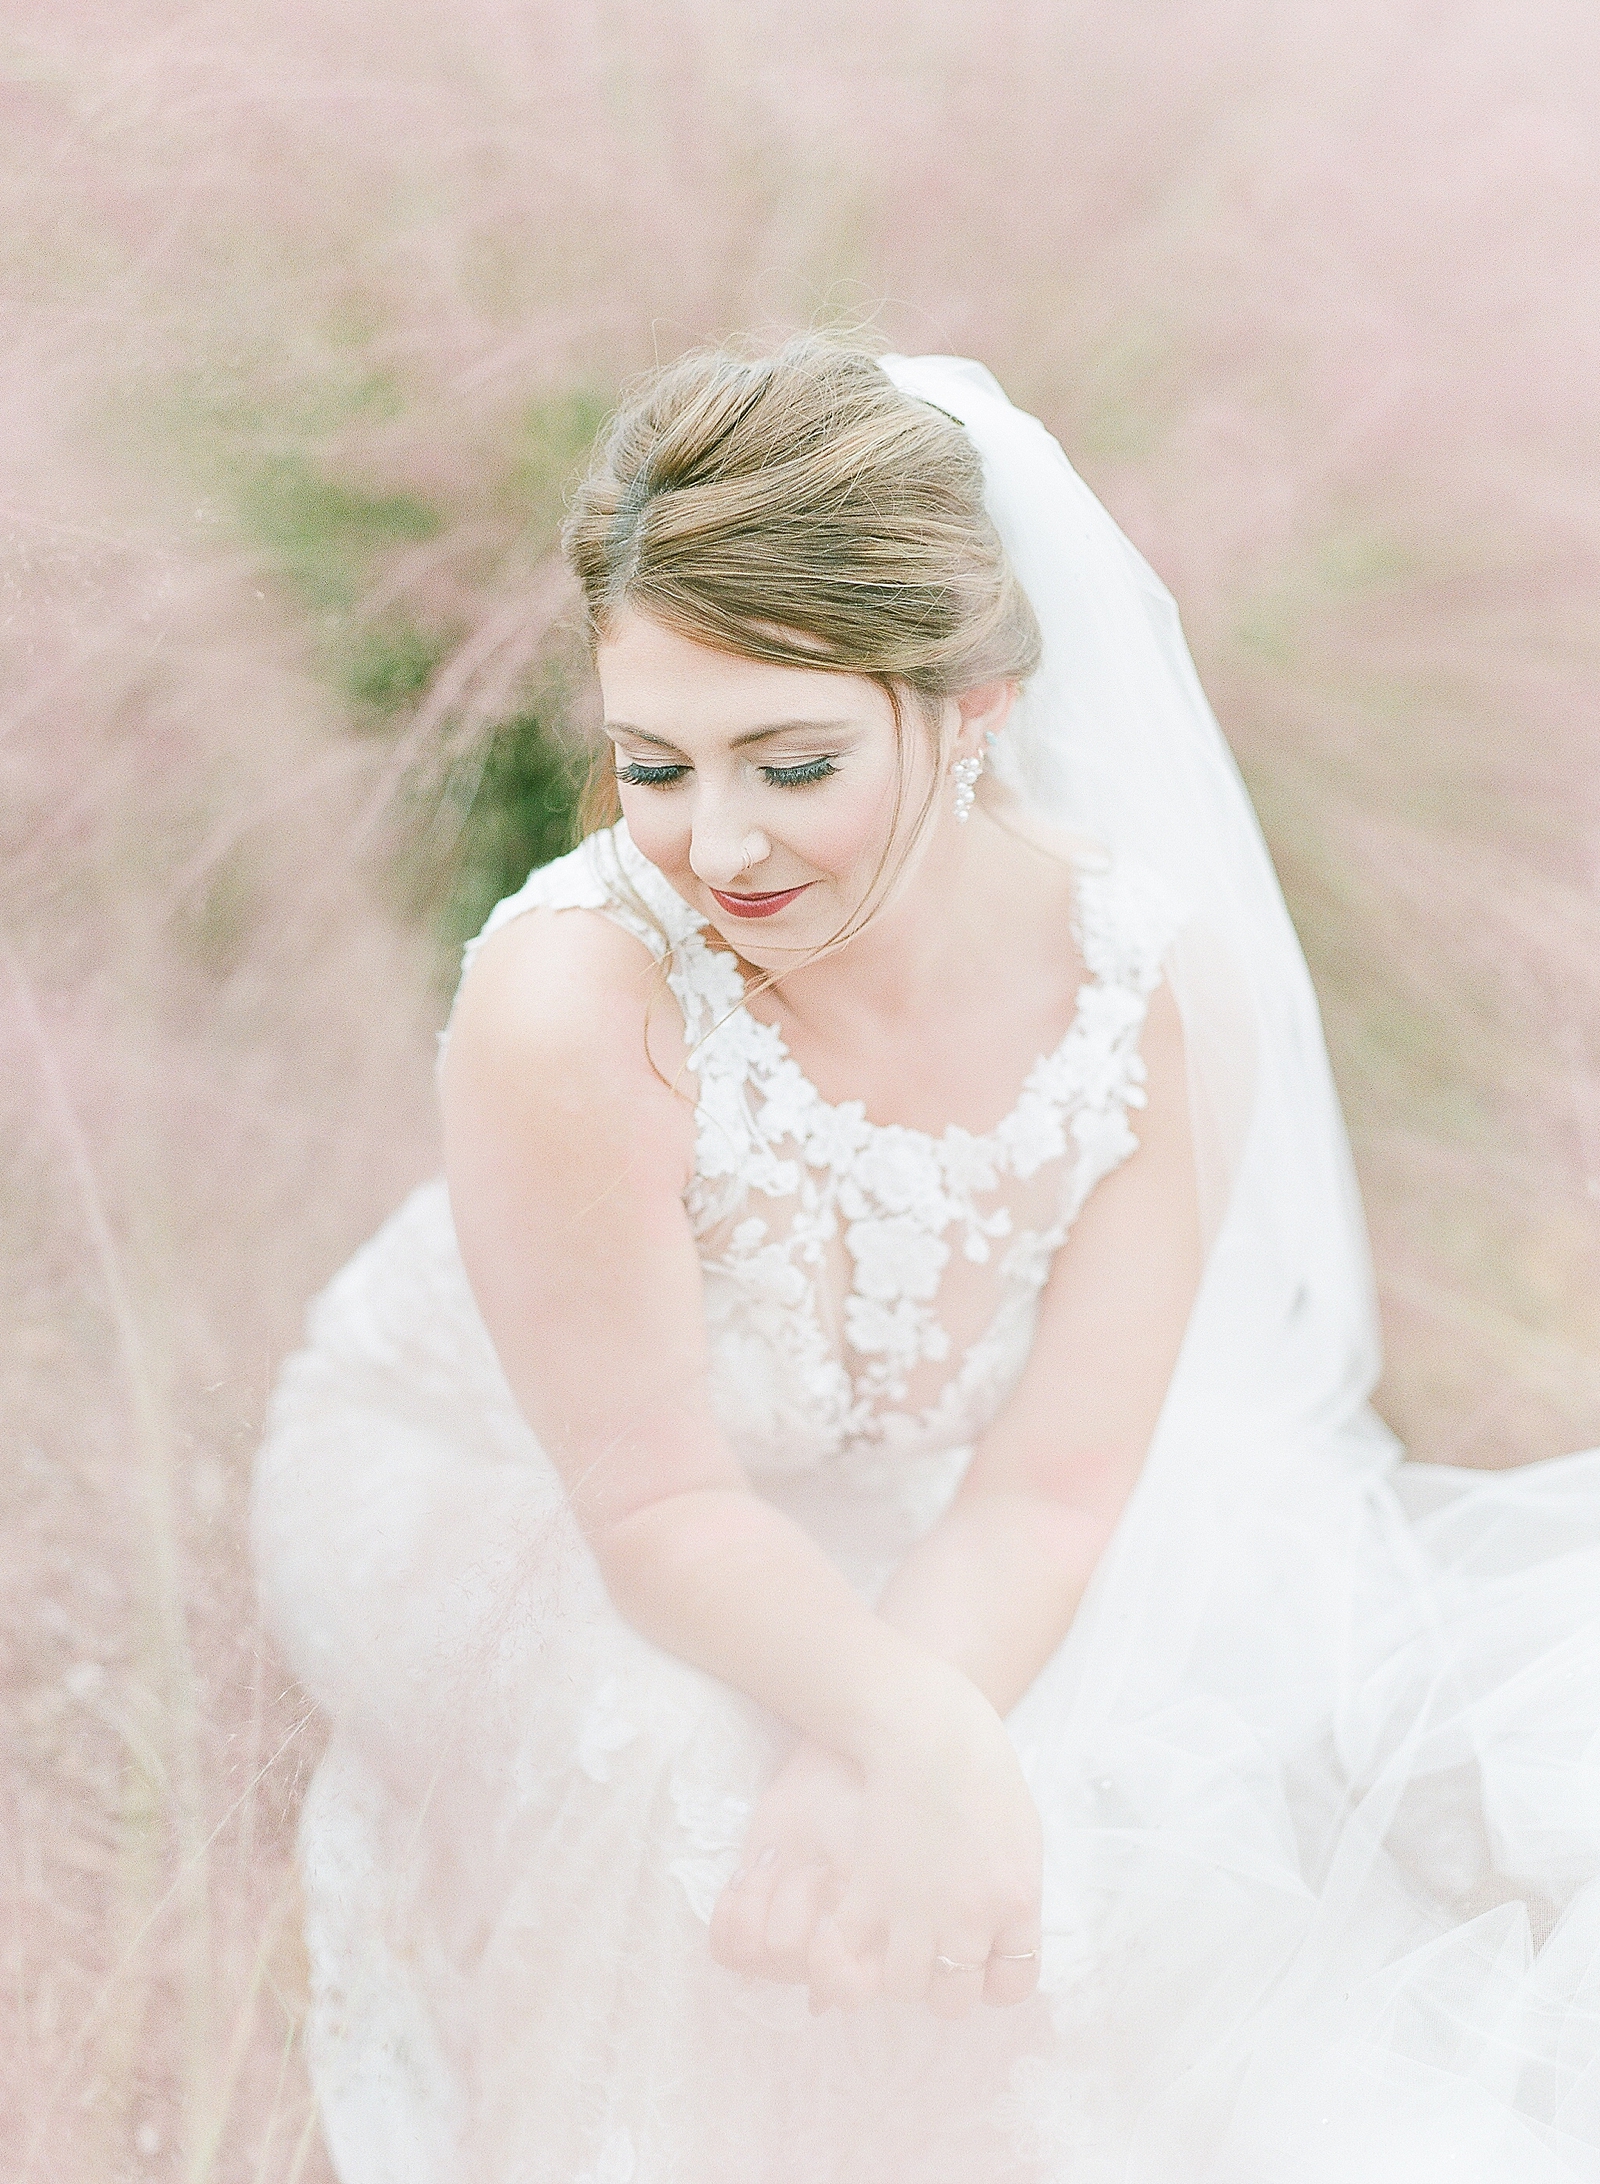 Asheville Bridal Editorial Bride Sitting in Mauve Flowers Looking Down Photo